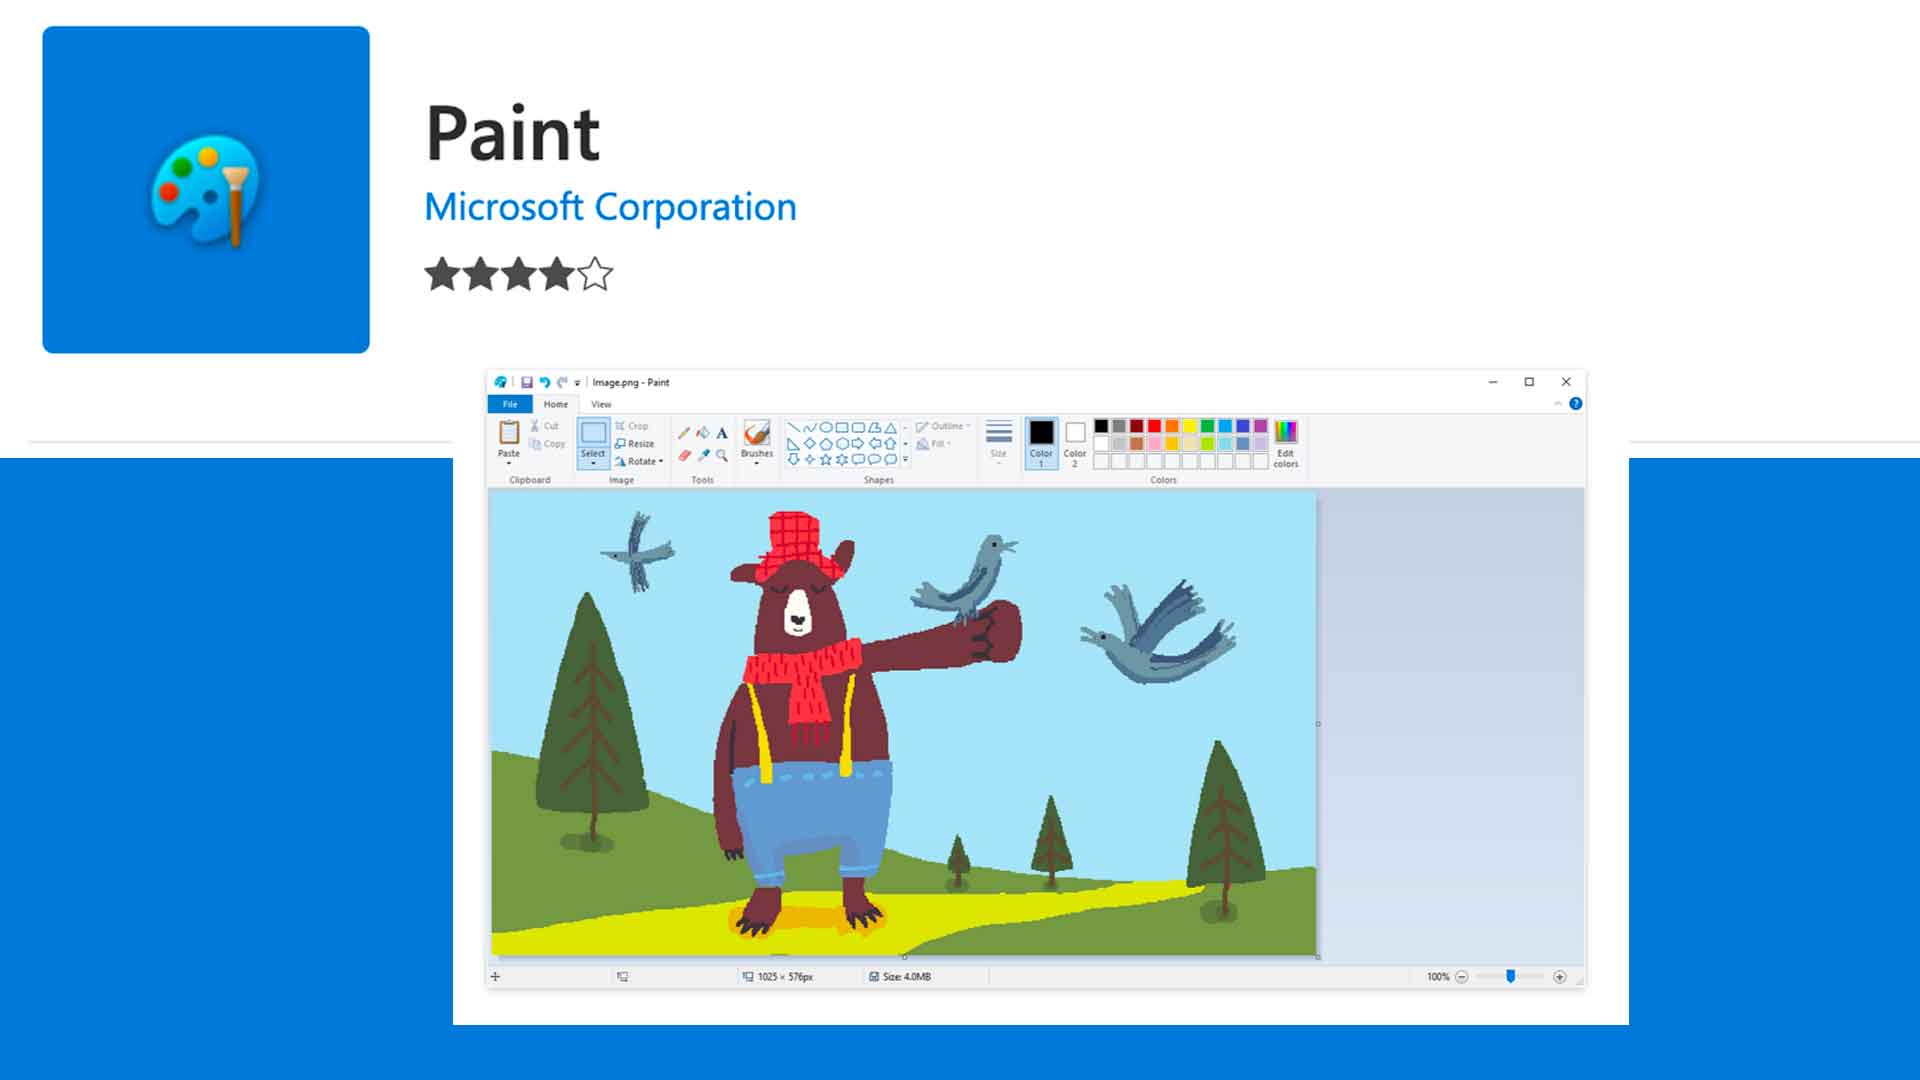 Paint gets a background removal tool